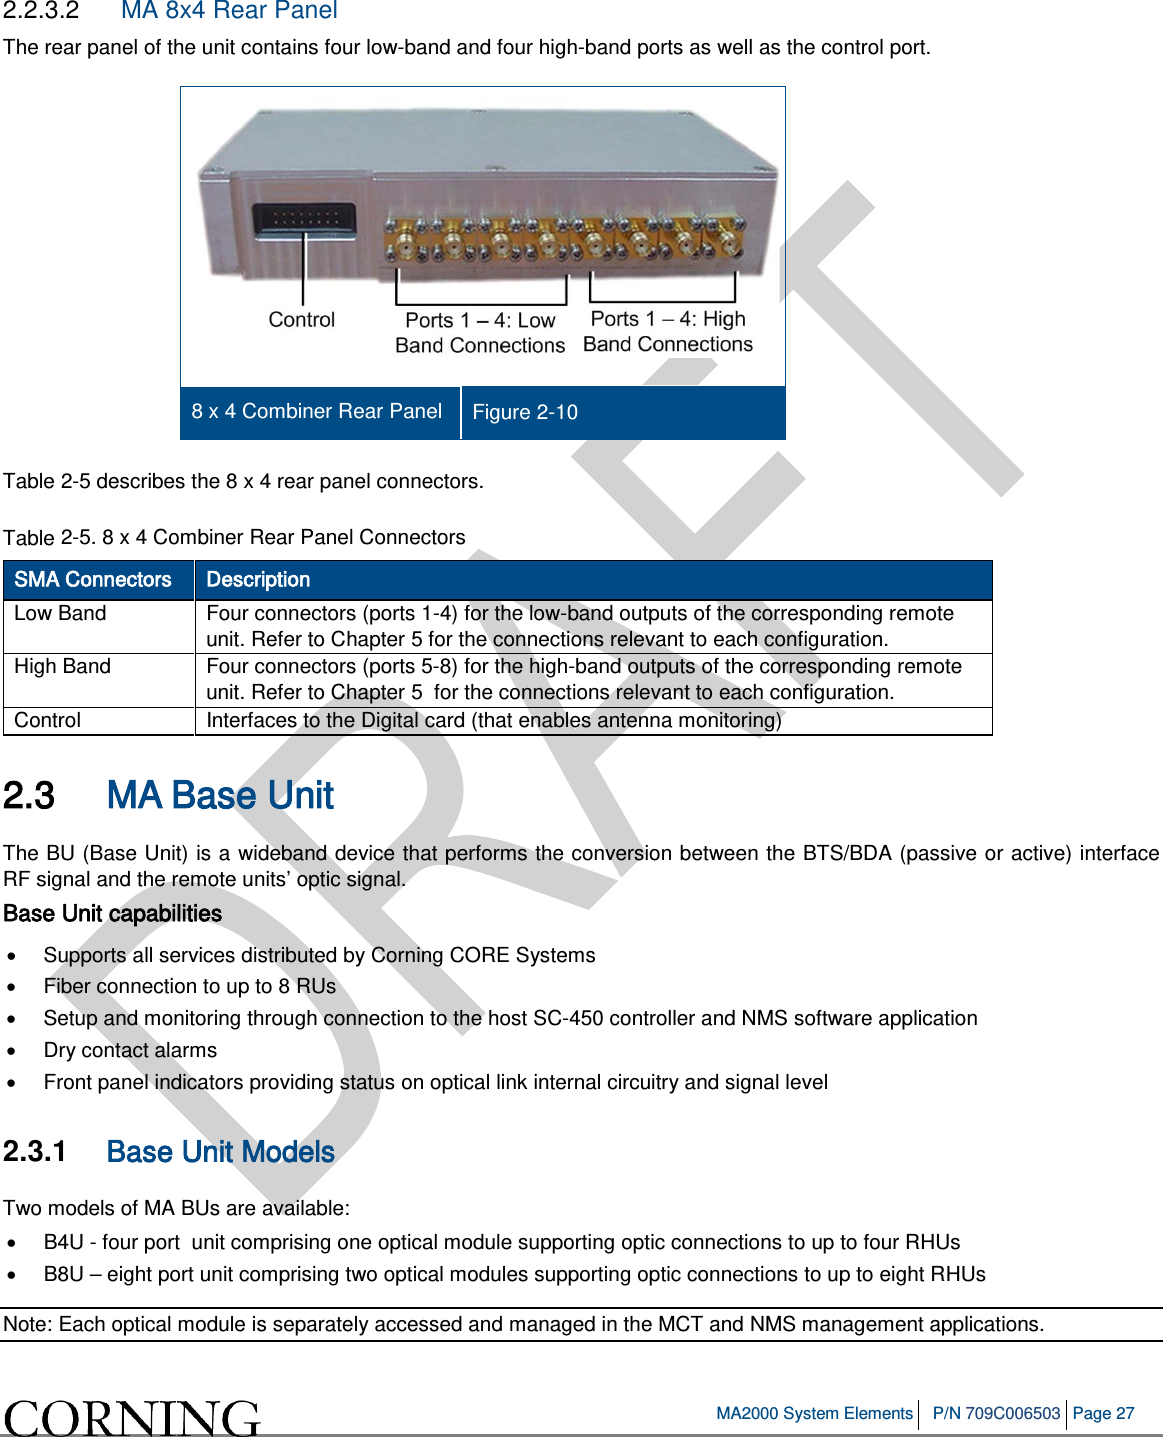   MA2000 System Elements P/N 709C006503 Page 27   2.2.3.2  MA 8x4 Rear Panel The rear panel of the unit contains four low-band and four high-band ports as well as the control port.  8 x 4 Combiner Rear Panel Figure  2-10 Table  2-5 describes the 8 x 4 rear panel connectors. Table  2-5. 8 x 4 Combiner Rear Panel Connectors SMA Connectors Description Low Band  Four connectors (ports 1-4) for the low-band outputs of the corresponding remote unit. Refer to Chapter  5 for the connections relevant to each configuration. High Band Four connectors (ports 5-8) for the high-band outputs of the corresponding remote unit. Refer to Chapter  5  for the connections relevant to each configuration. Control  Interfaces to the Digital card (that enables antenna monitoring) 2.3 MA Base Unit  The BU (Base Unit) is a wideband device that performs the conversion between the BTS/BDA (passive or active) interface RF signal and the remote units’ optic signal.  Base Unit capabilities • Supports all services distributed by Corning CORE Systems • Fiber connection to up to 8 RUs • Setup and monitoring through connection to the host SC-450 controller and NMS software application • Dry contact alarms • Front panel indicators providing status on optical link internal circuitry and signal level 2.3.1  Base Unit Models  Two models of MA BUs are available:  • B4U - four port  unit comprising one optical module supporting optic connections to up to four RHUs • B8U – eight port unit comprising two optical modules supporting optic connections to up to eight RHUs Note: Each optical module is separately accessed and managed in the MCT and NMS management applications. 